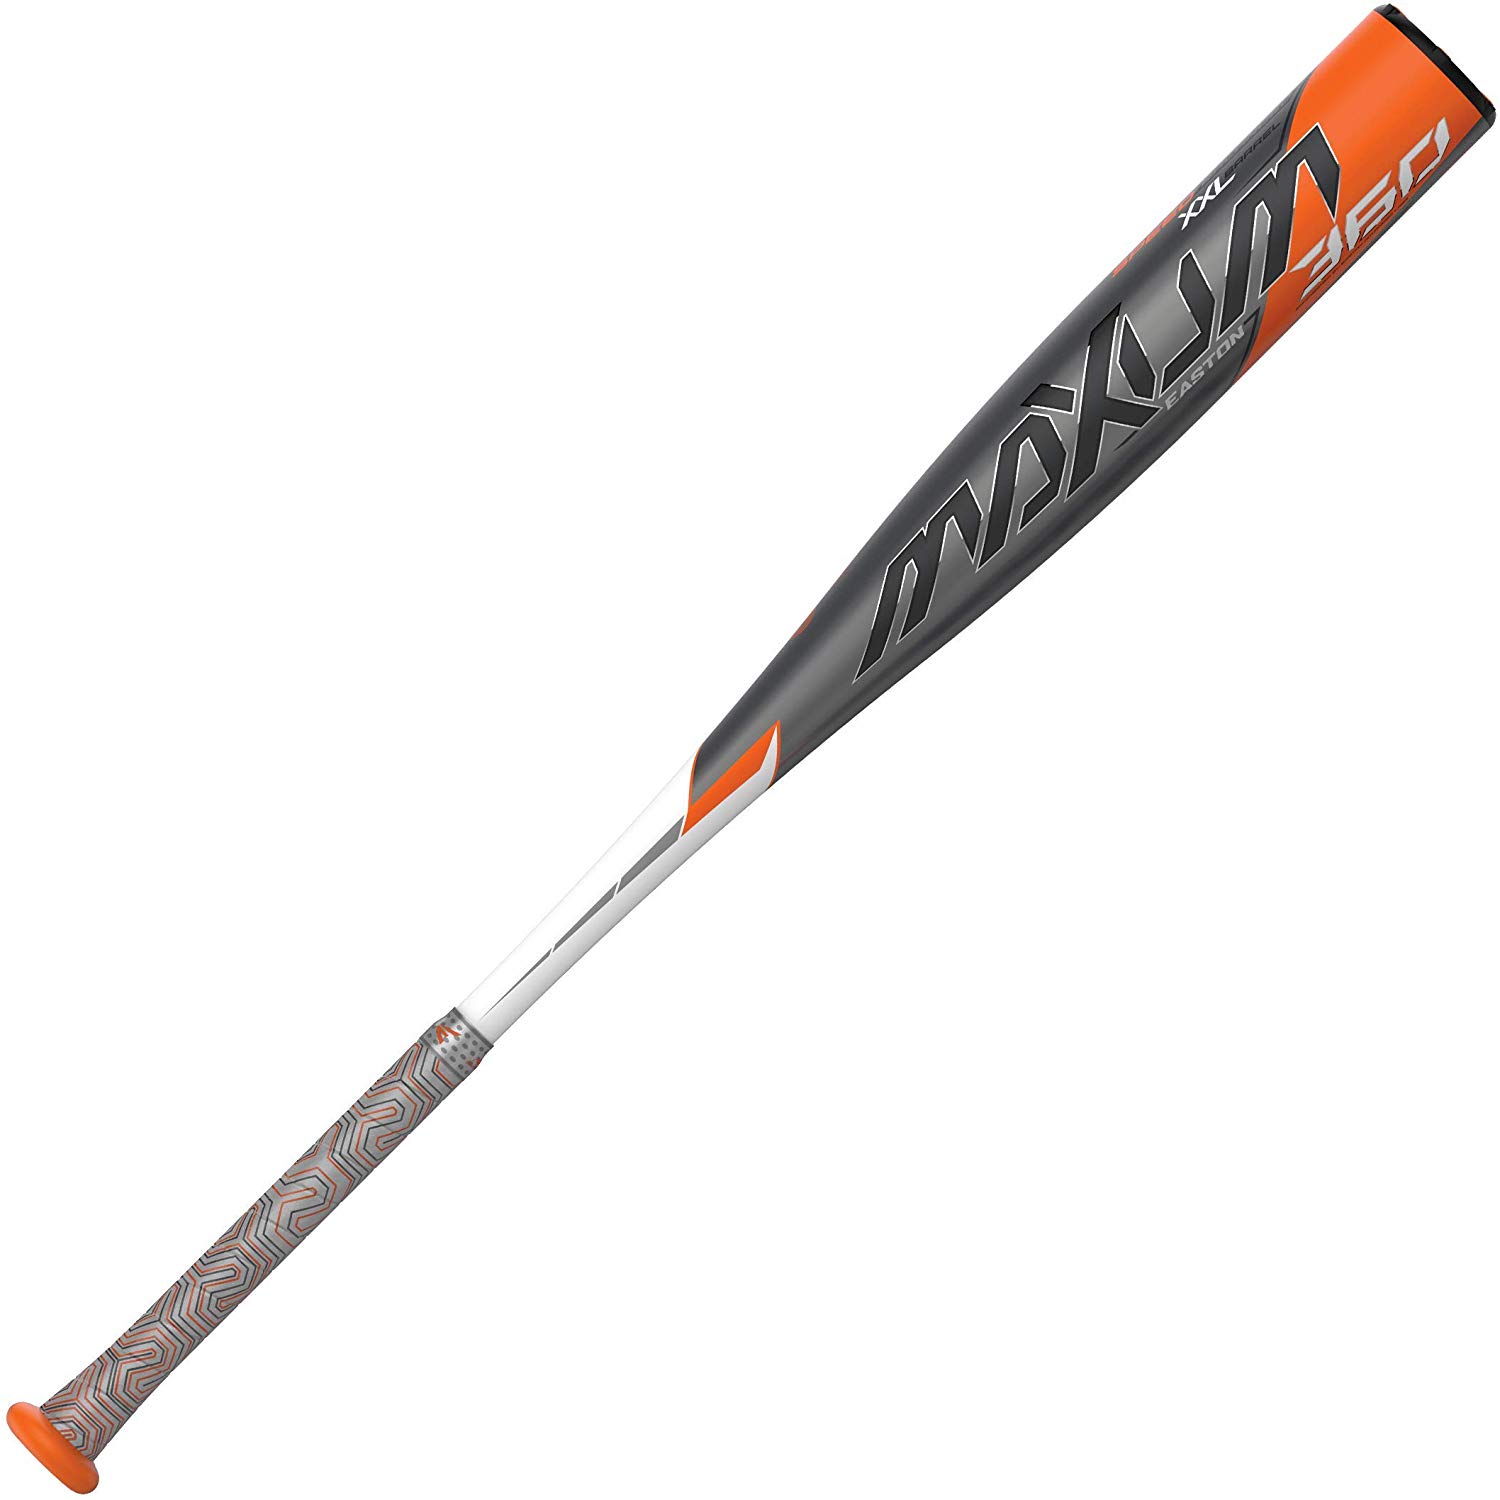 `-3 Length to Weight Ratio 1-Piece Composite Speed Balanced Swing Weight BBCOR Certified. The one-piece XXL barrel on the Easton Maxum 360 -3 lays claim to the longest barrel and biggest sweet spot in the game. Seamless Carbon Construction combined with 360 Engineering for 360° of barrel-tuned precision, delivering pure flexural energy, uniform barrel strength and maximum performance from knob to cap. Computer-controlled precision molding technology produces an ultra-consistent, lightweight wall for optimal performance in every swing. Speed balanced swing weight provides optimized balance point for fast swing speed. Custom Lizards Skins grip, providing players with best-in-class feel, cushion and tack. Easton BBCOR bats are used by top college programs and is the #1 Bat in College World Series History. Comes with a 1 year warranty from Easton. - -3 Length to Weight Ratio - 2 5/8 Inch Barrel Diameter - 1-Piece Composite - XXL Barrel - Computer-Controlled Precision Molding Technology - Speed Balanced Swing Weight - Lizard Skins Custom Bat Grip - BBCOR Certified - 1 Year Manufacturer's Warranty